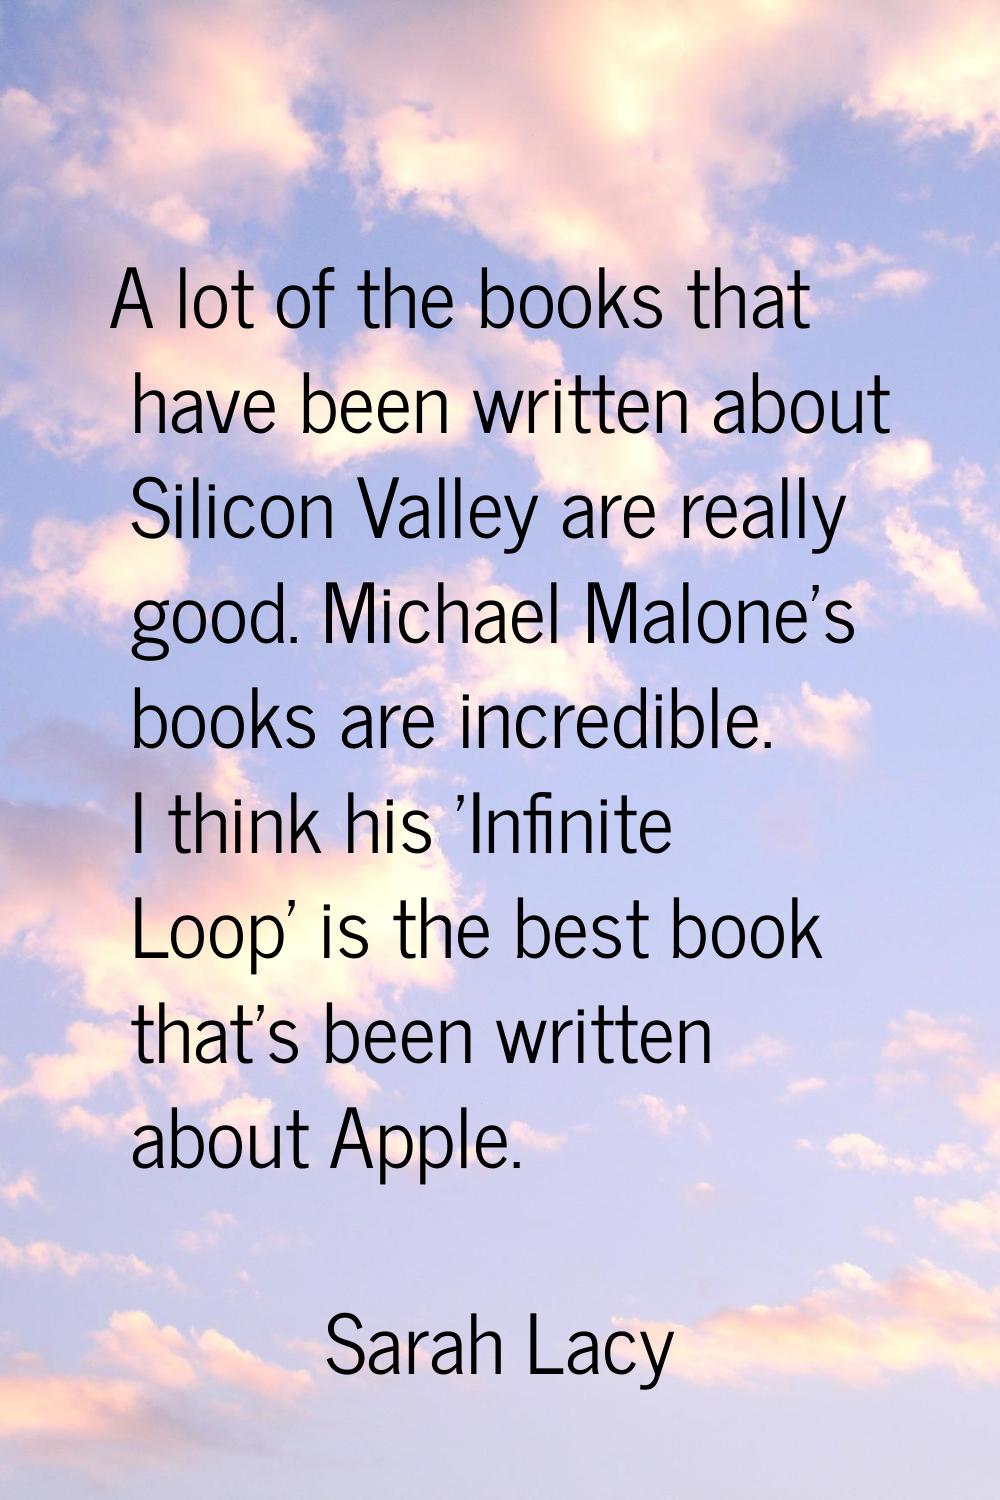 A lot of the books that have been written about Silicon Valley are really good. Michael Malone's bo